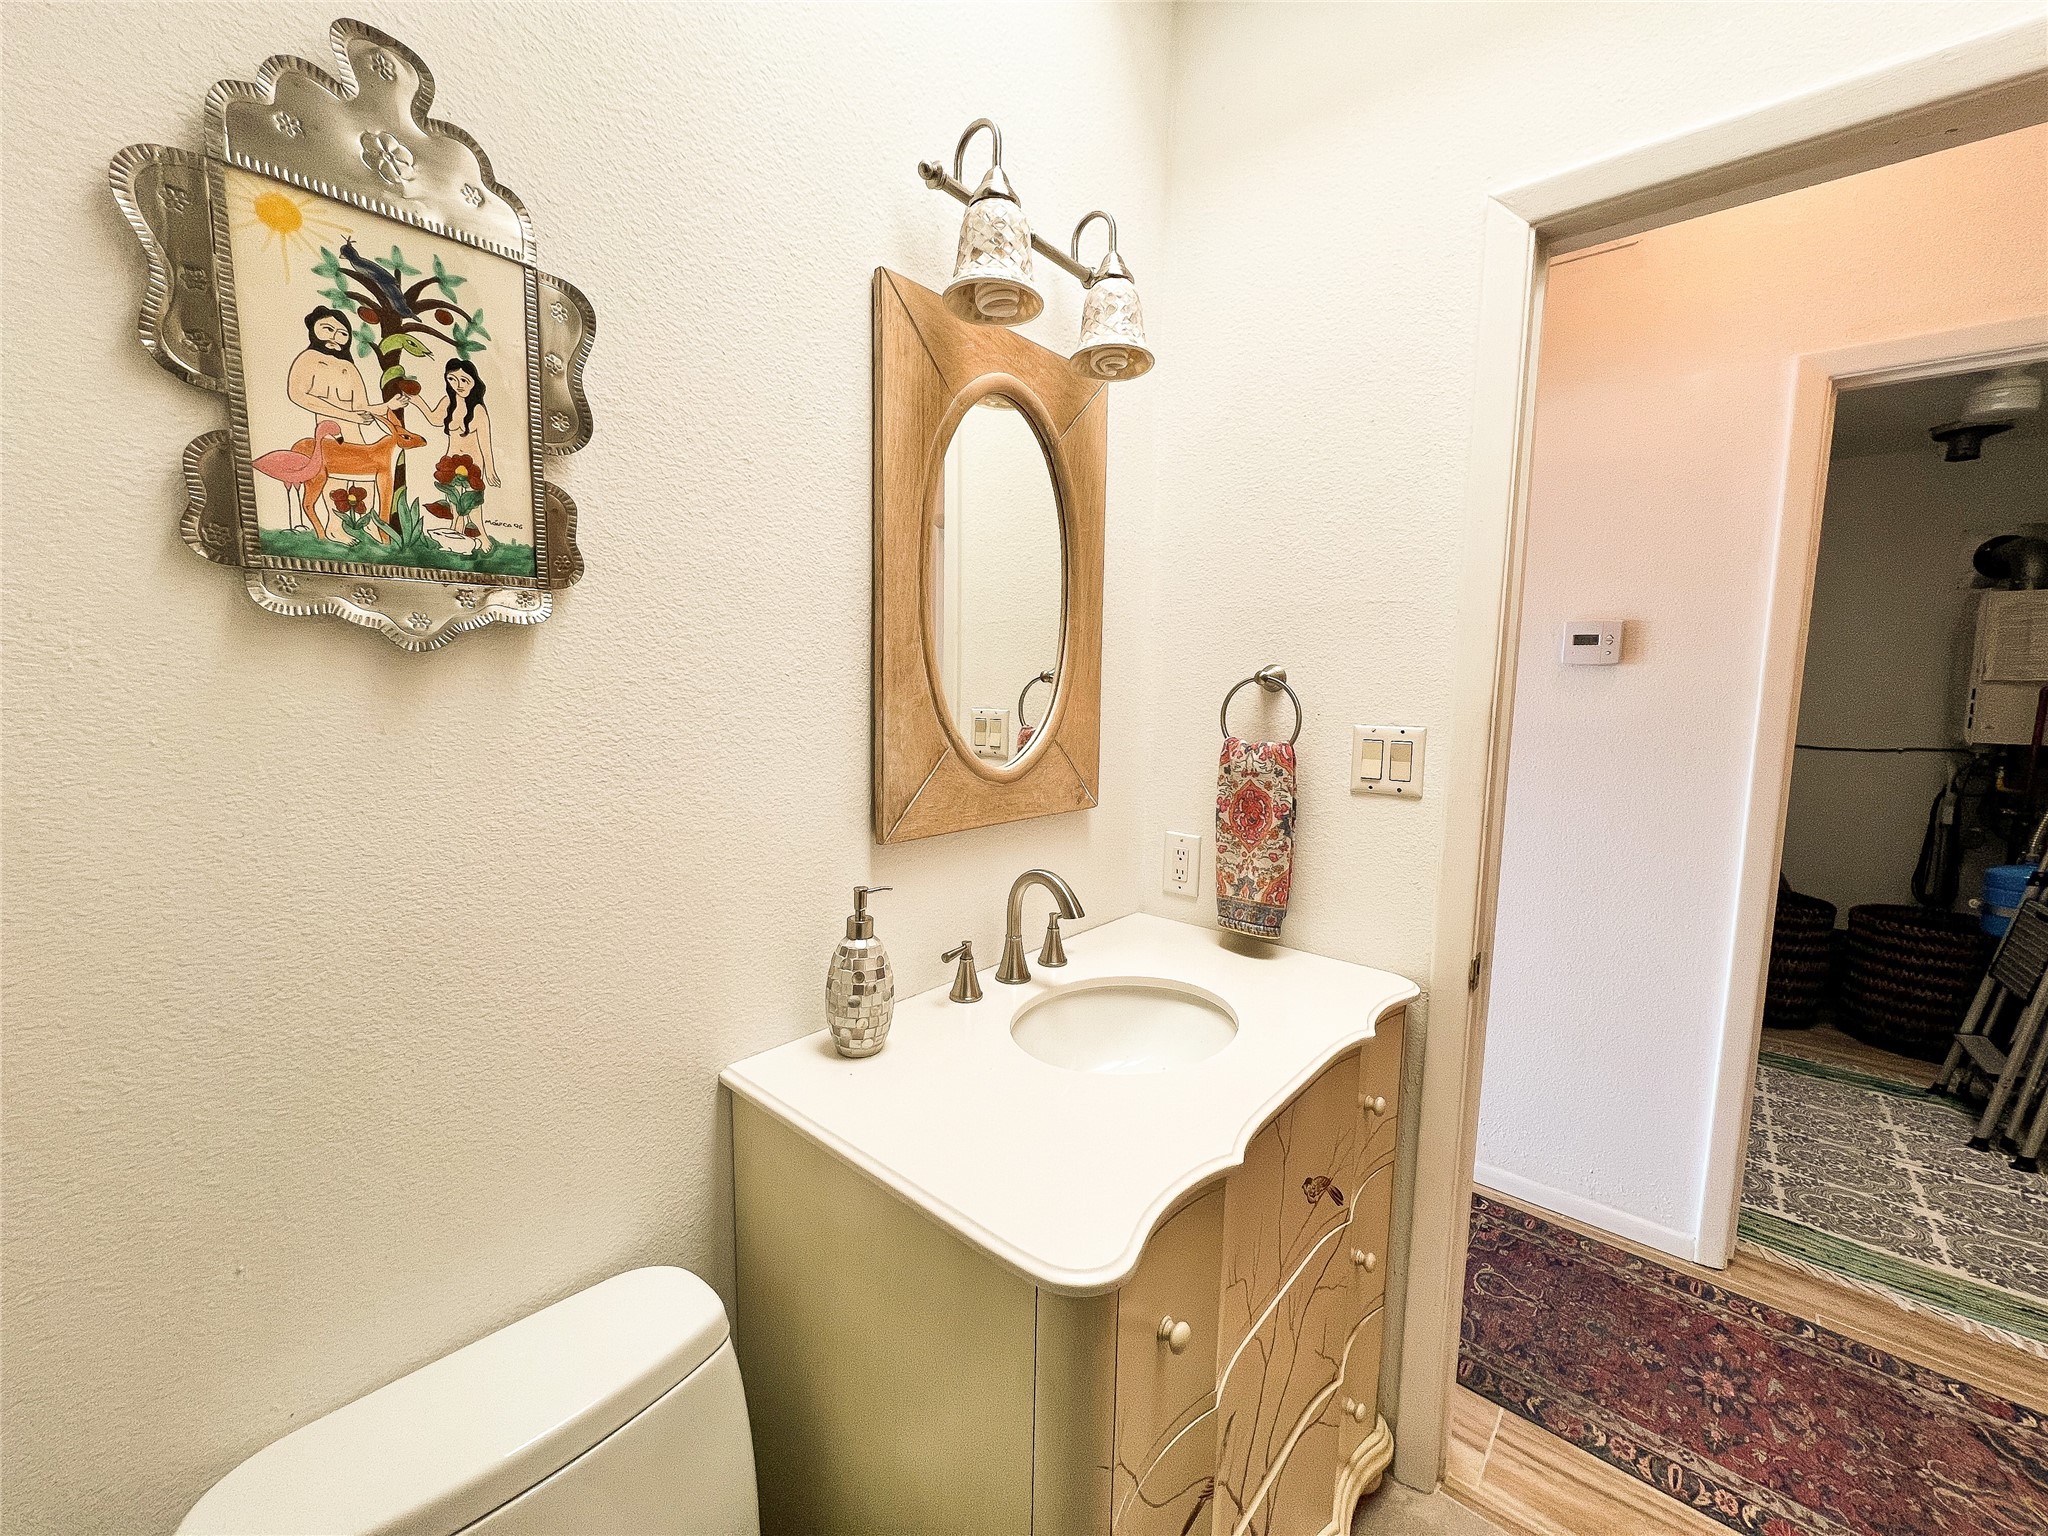 127 Calle Don Jose, Santa Fe, New Mexico 87501, 2 Bedrooms Bedrooms, ,2 BathroomsBathrooms,Residential,For Sale,127 Calle Don Jose,202400671